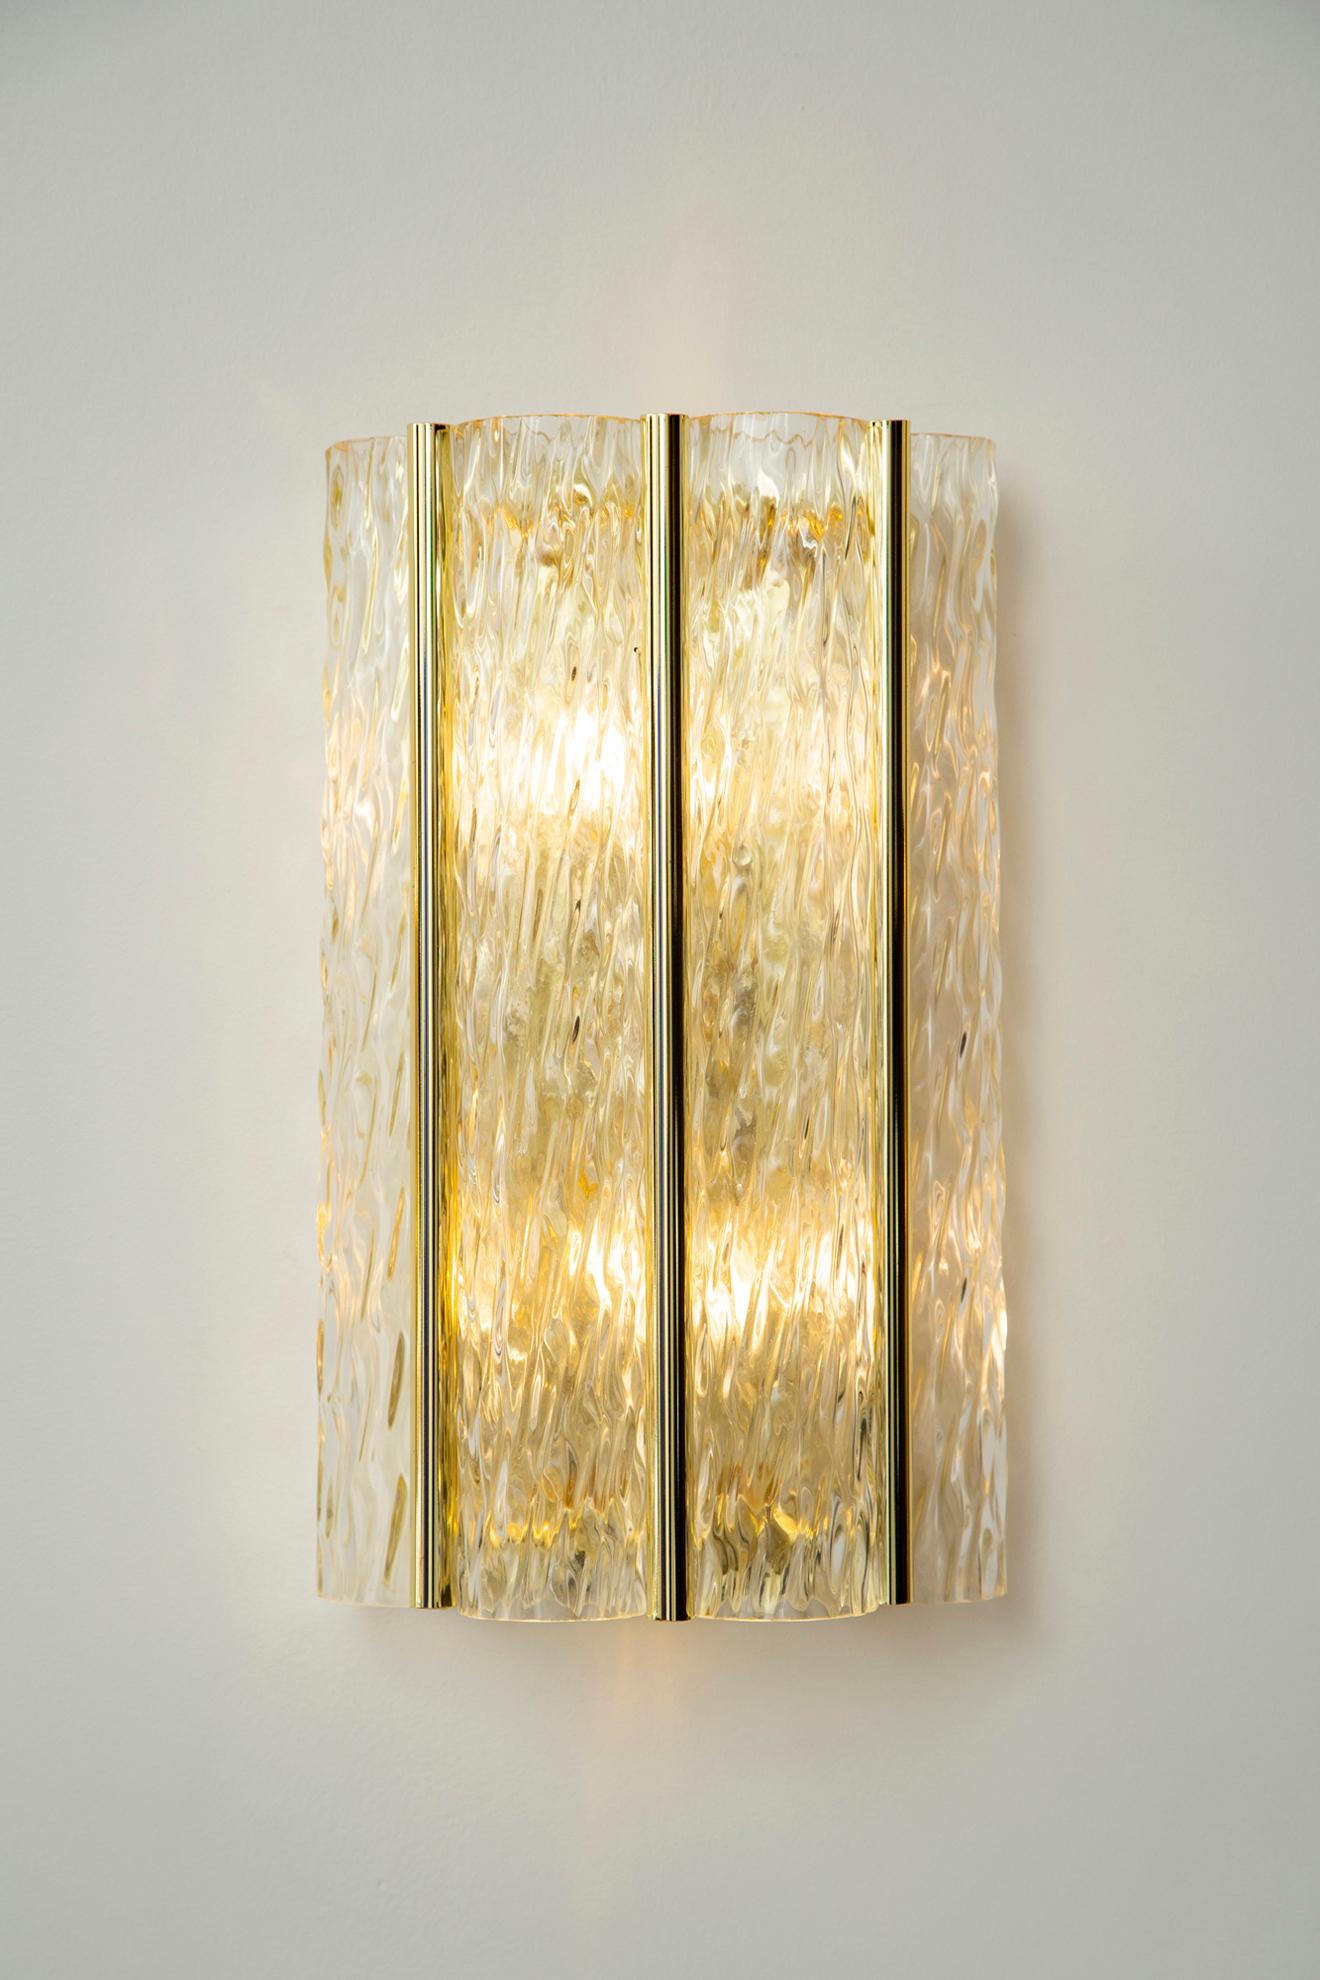 Pair of brass and glass wall lights, Italy 1980
Four clear textured glass per sconce
Brass/gold plated structure
Wired to US standart
2 E14 bulbs per sconce
Ready to ship from our Miami gallery.
  